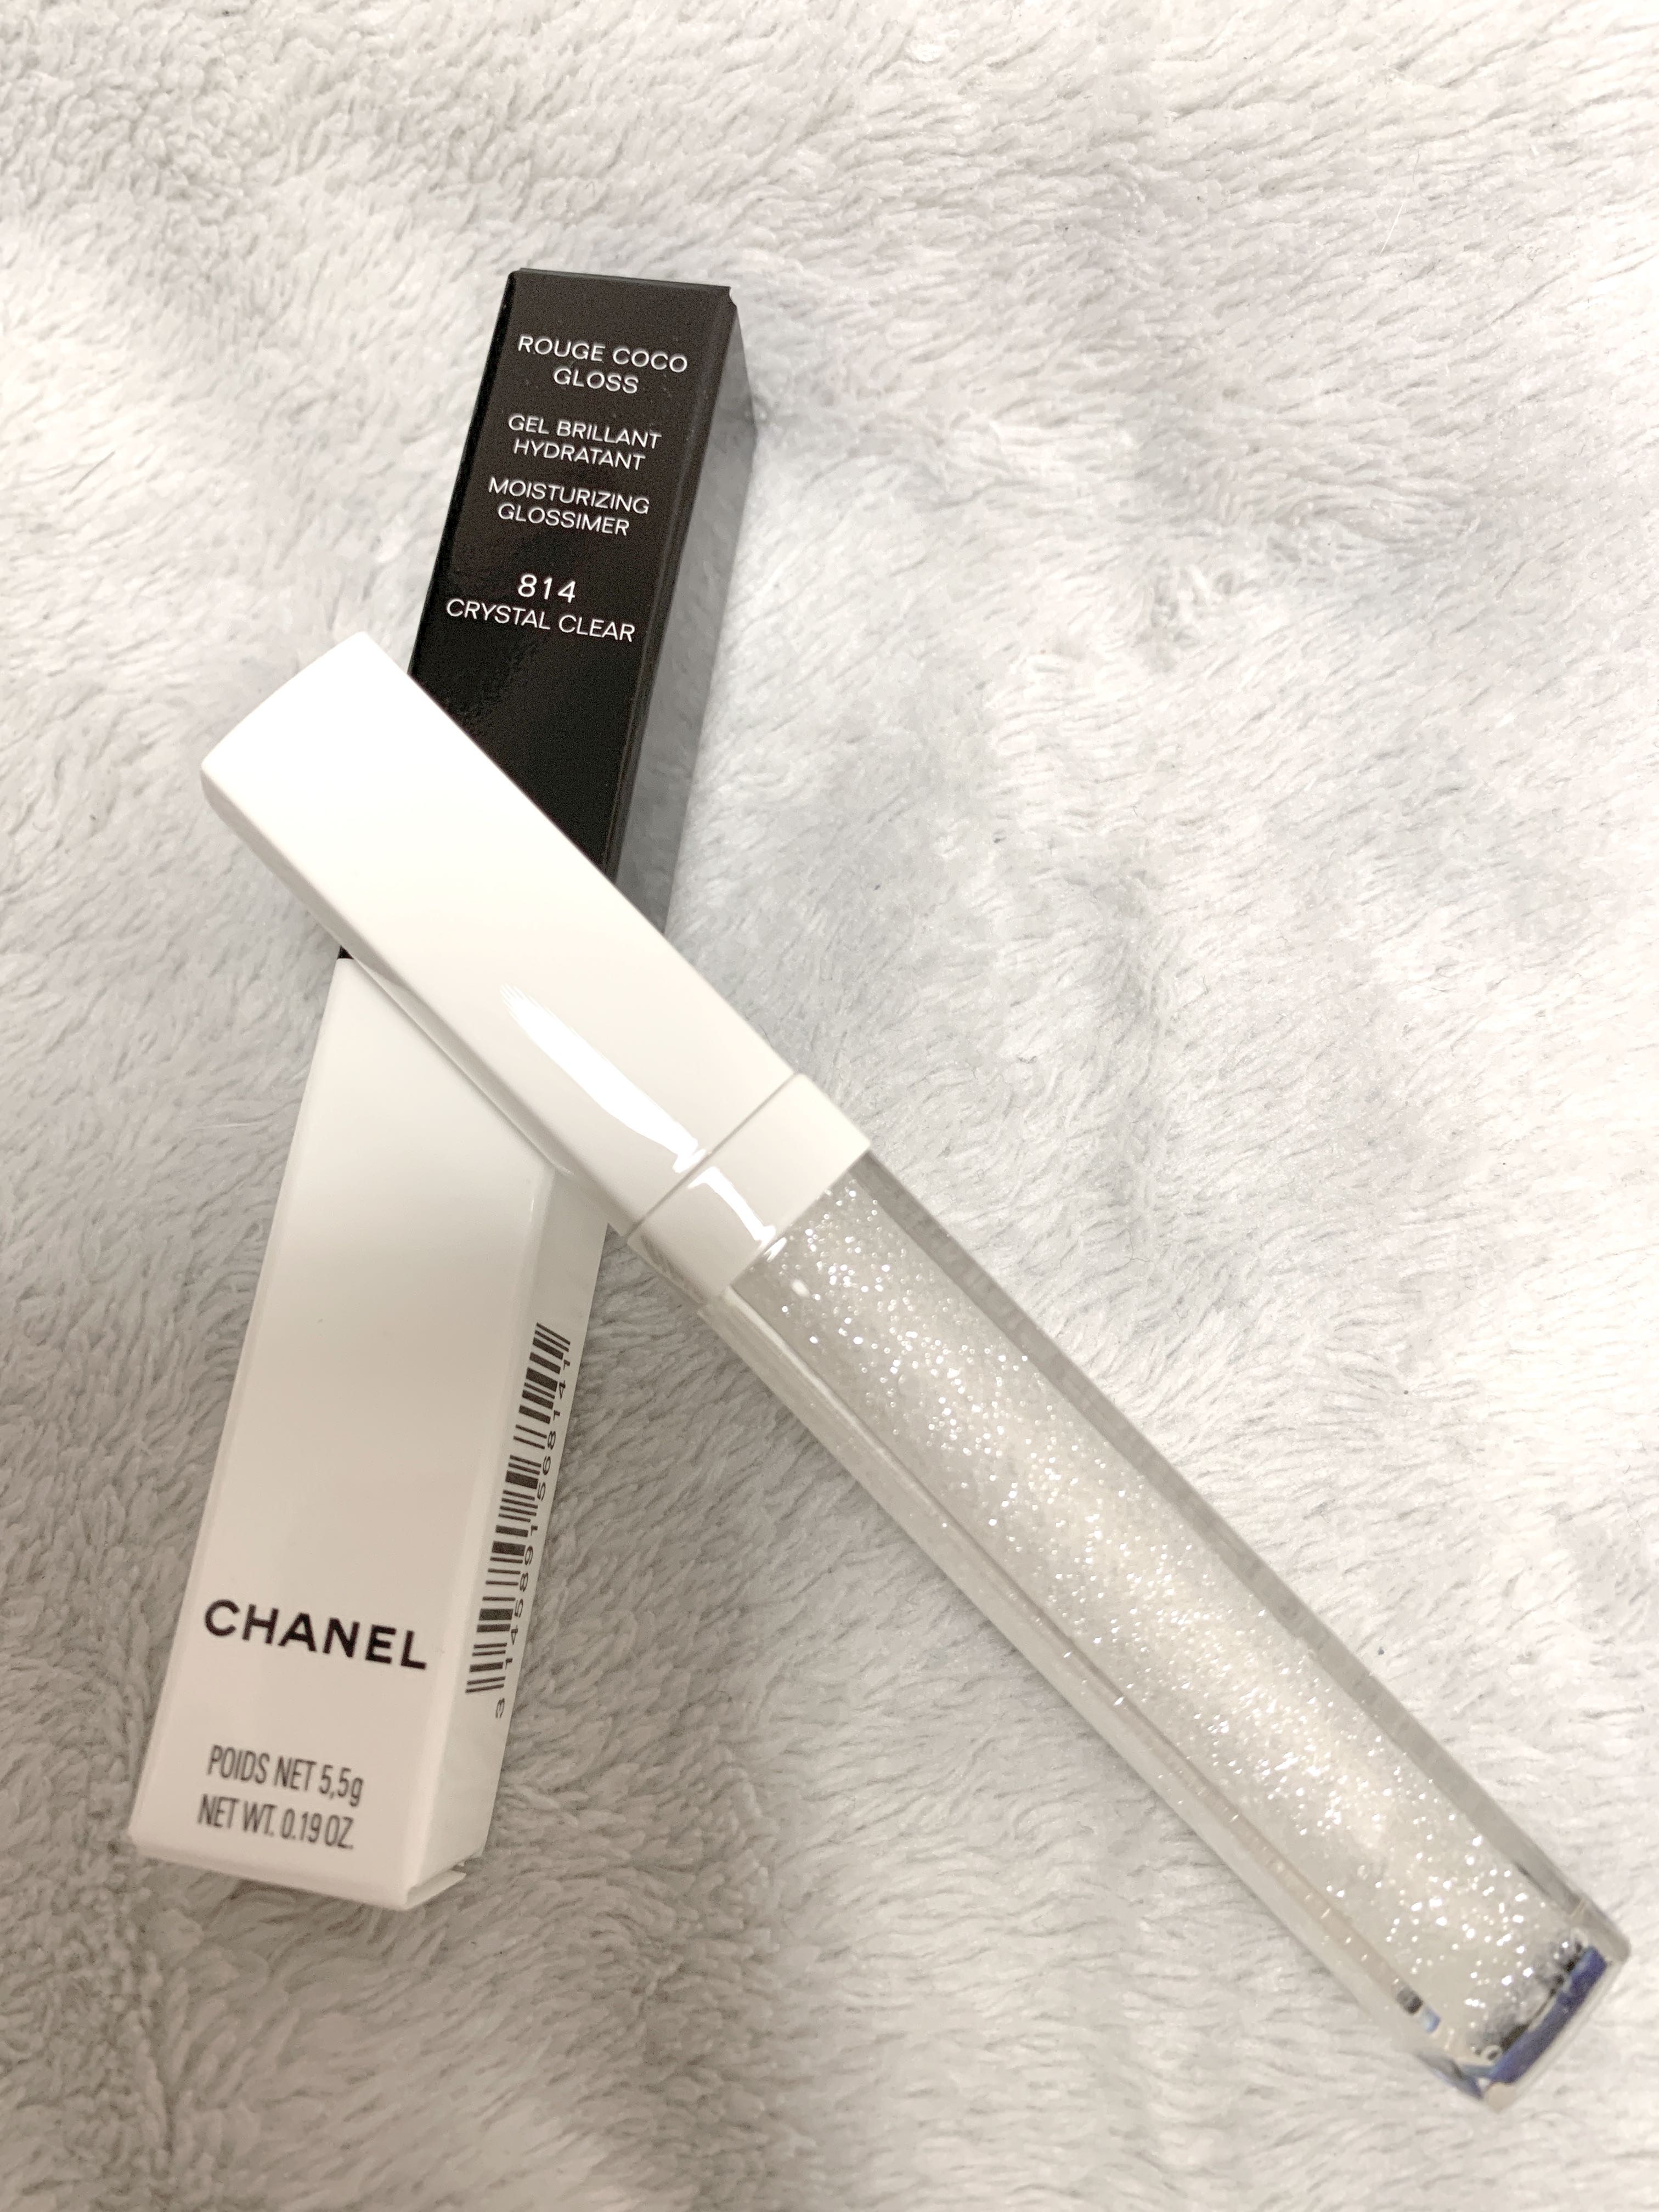 SF包郵) Chanel Rouge Coco Gloss #814 Crystal Clear, 美容＆個人護理